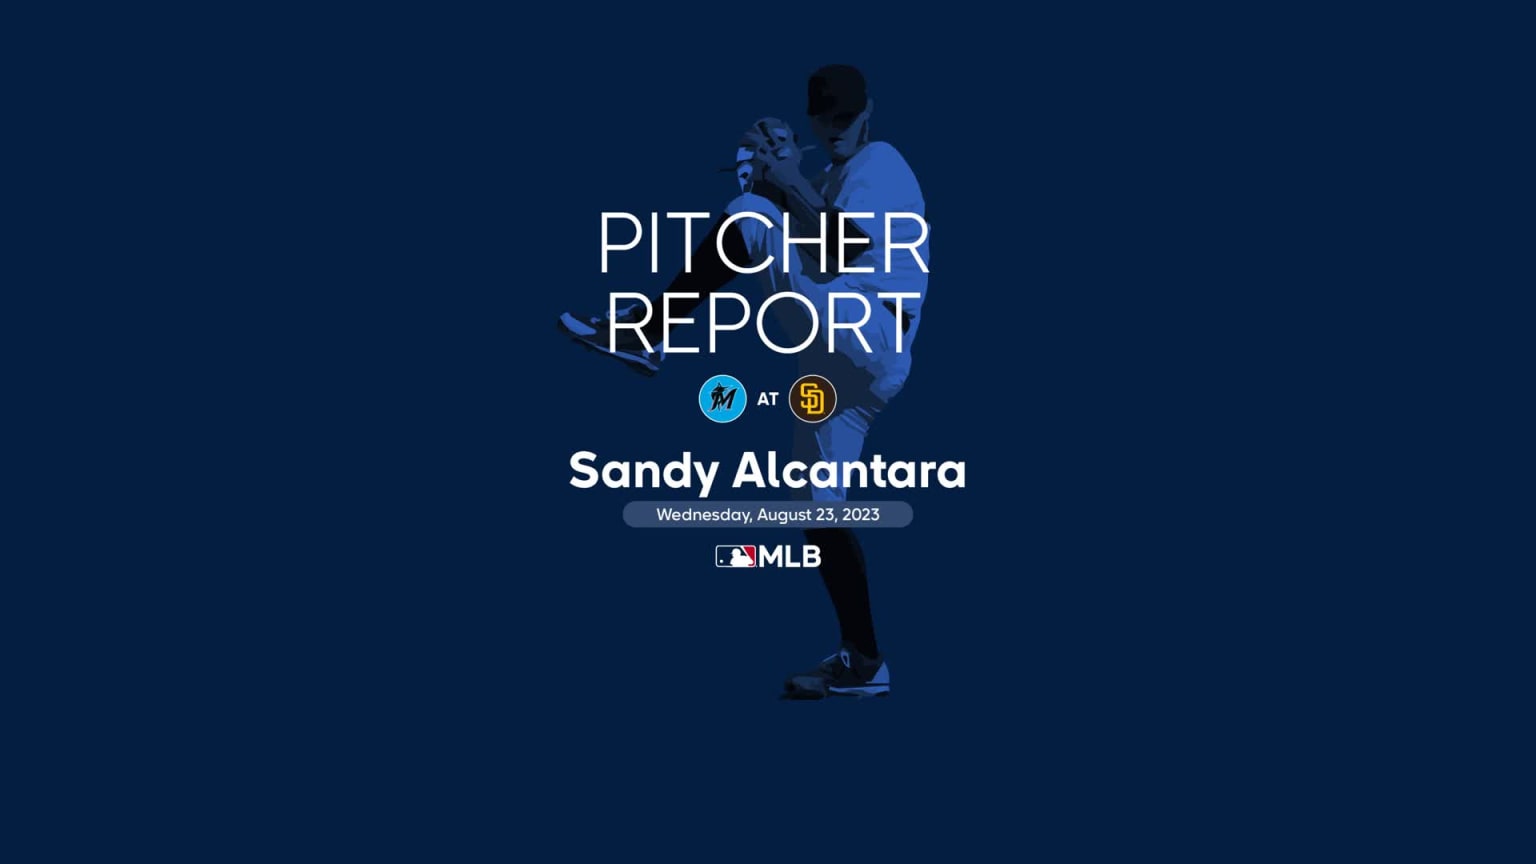 Sandy Alcantara's outing against the Padres, 08/23/2023